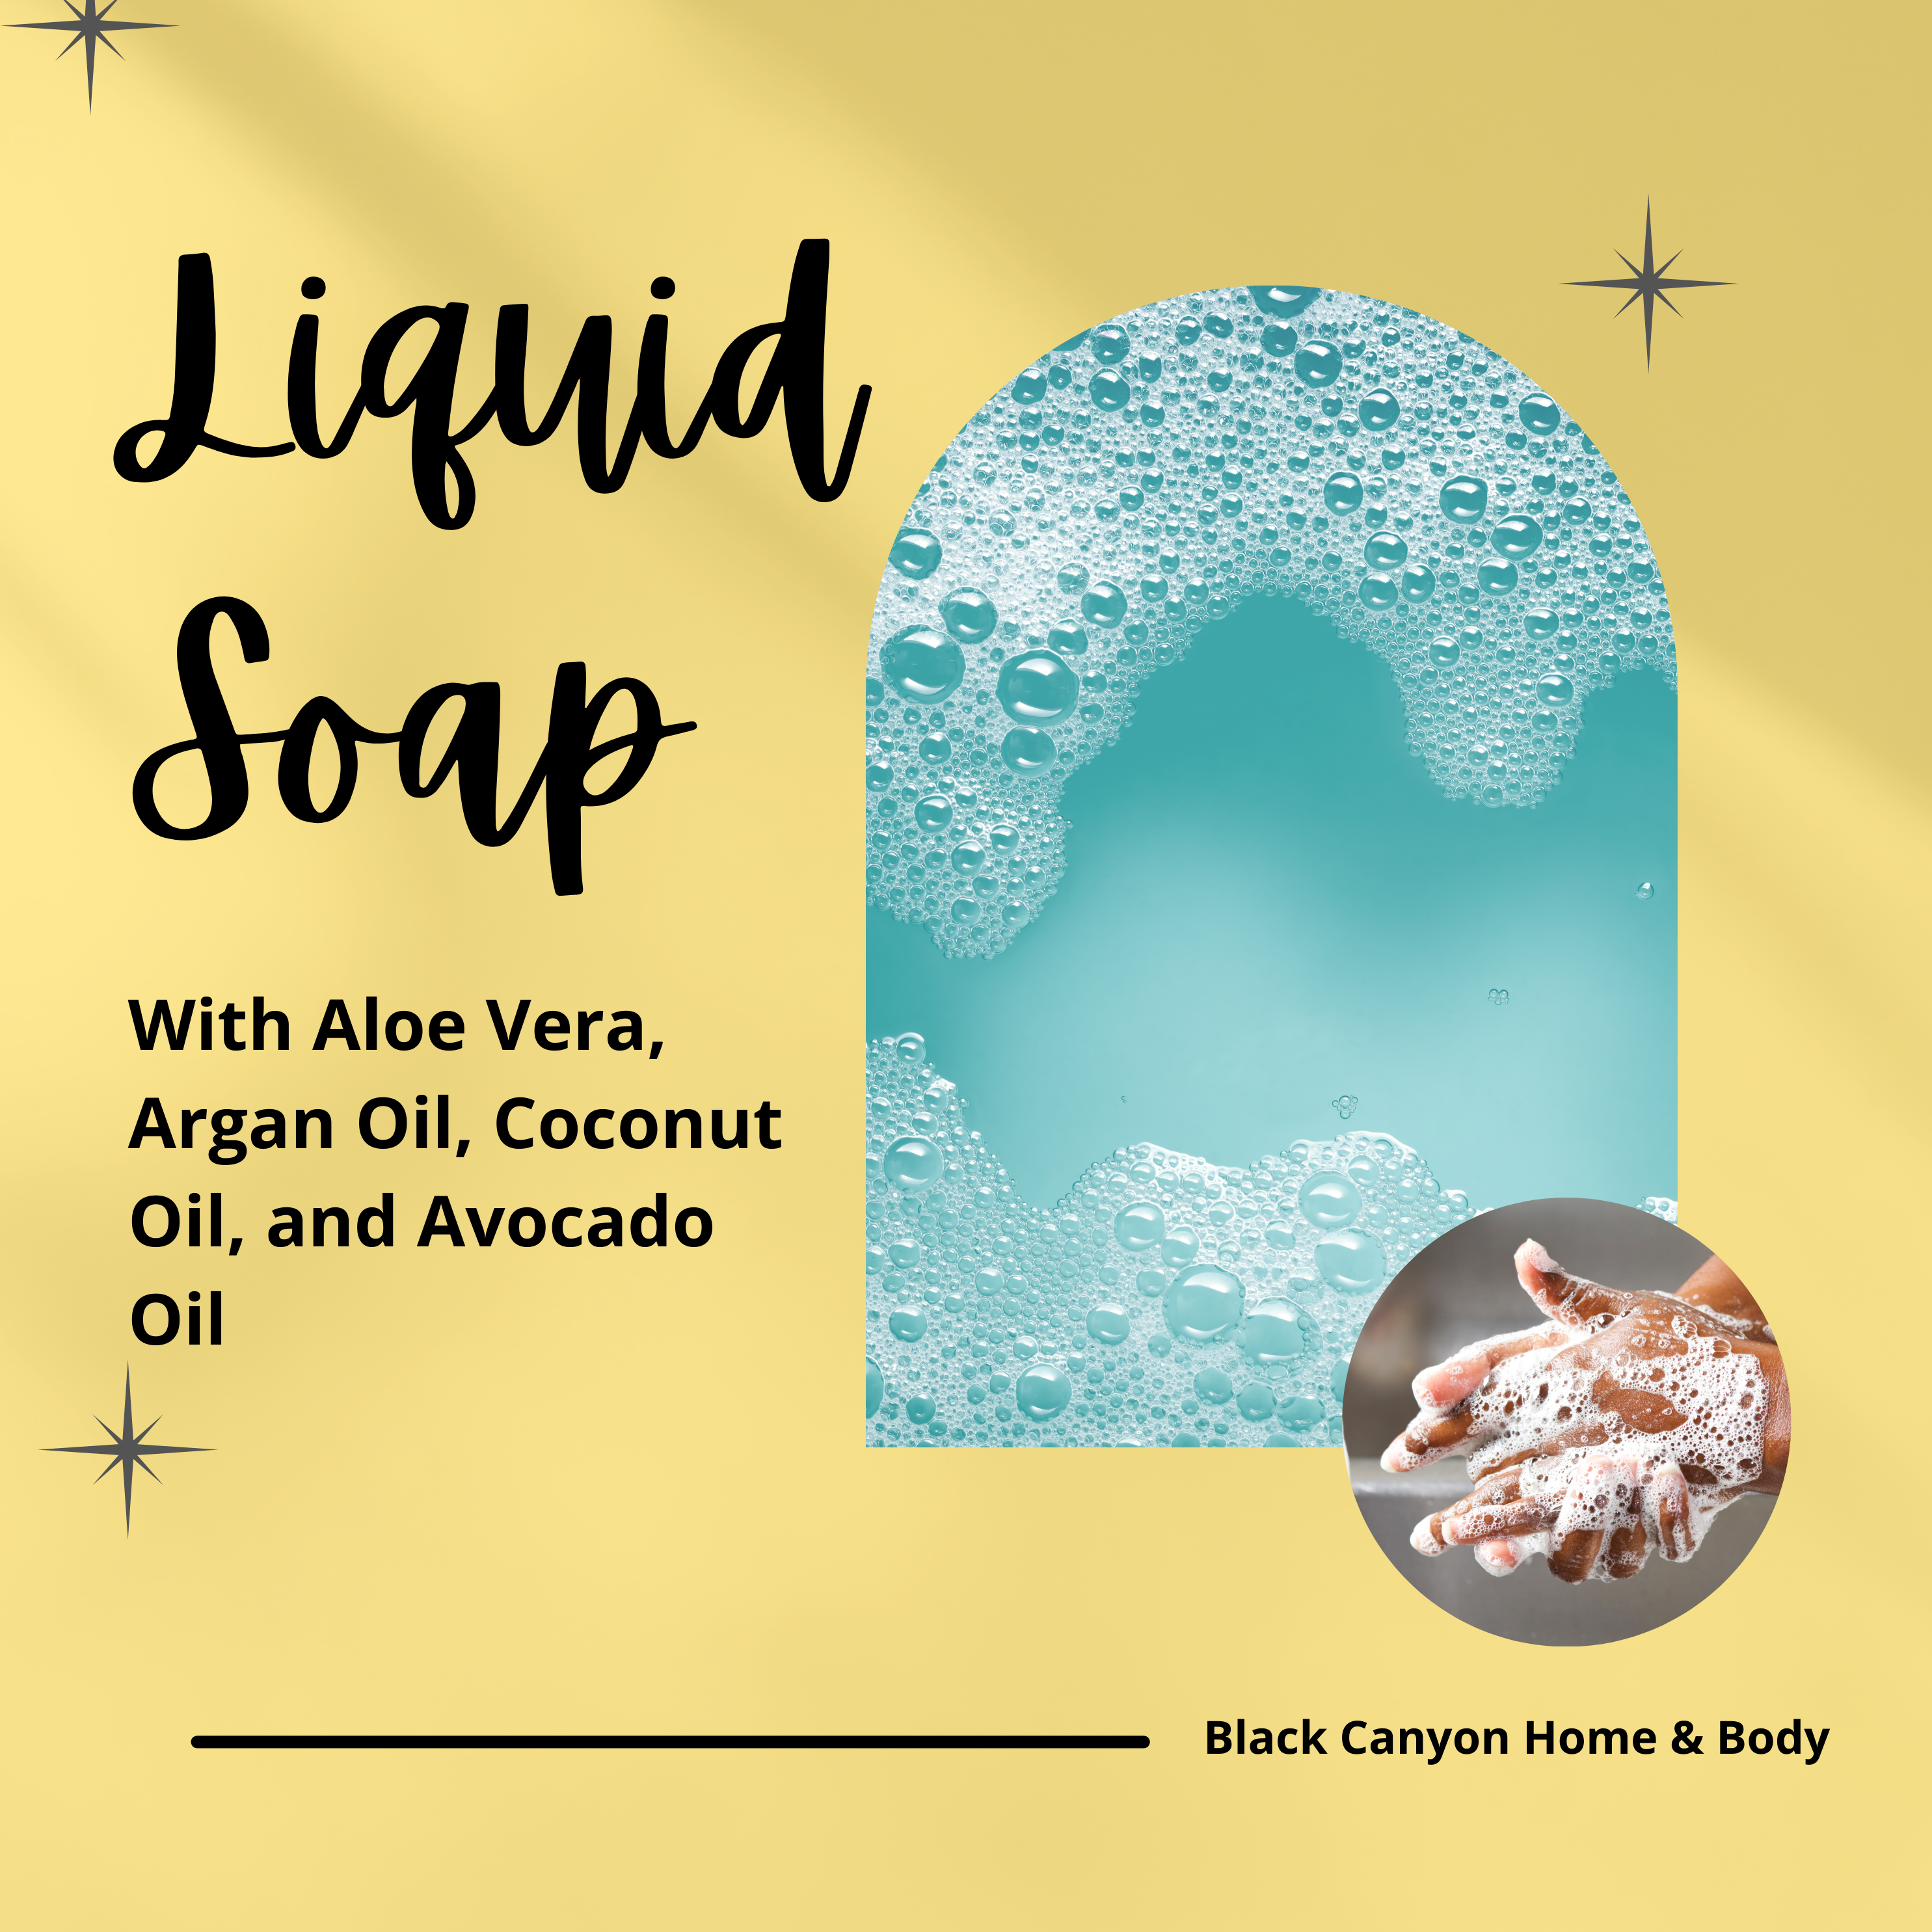 Black Canyon Creme Brulee Scented Liquid Hand Soap